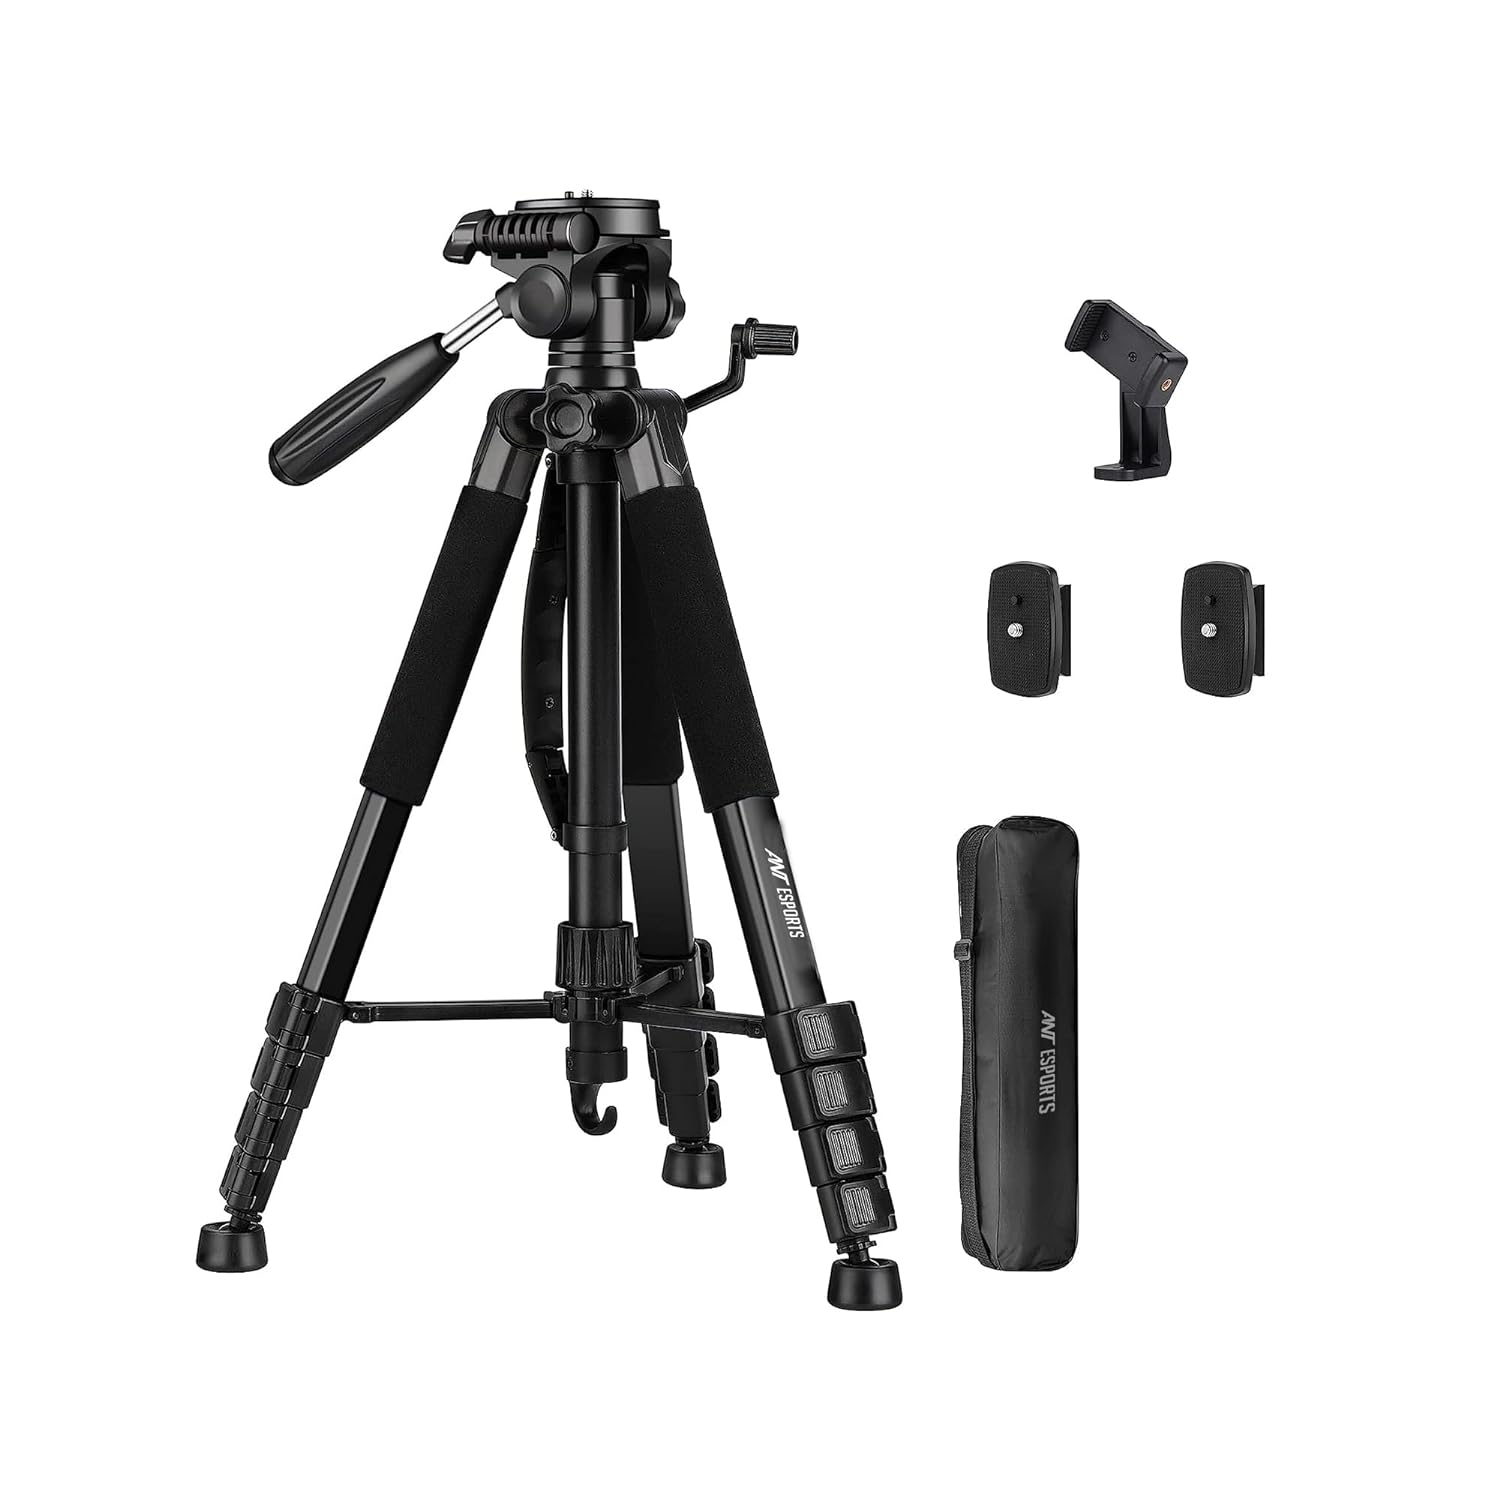 Ant Esports CATS02 Aluminium Tripod 55 140 cm with Mobile Holder & Carry Case for Smartphone & DSLR Camera Lightweight